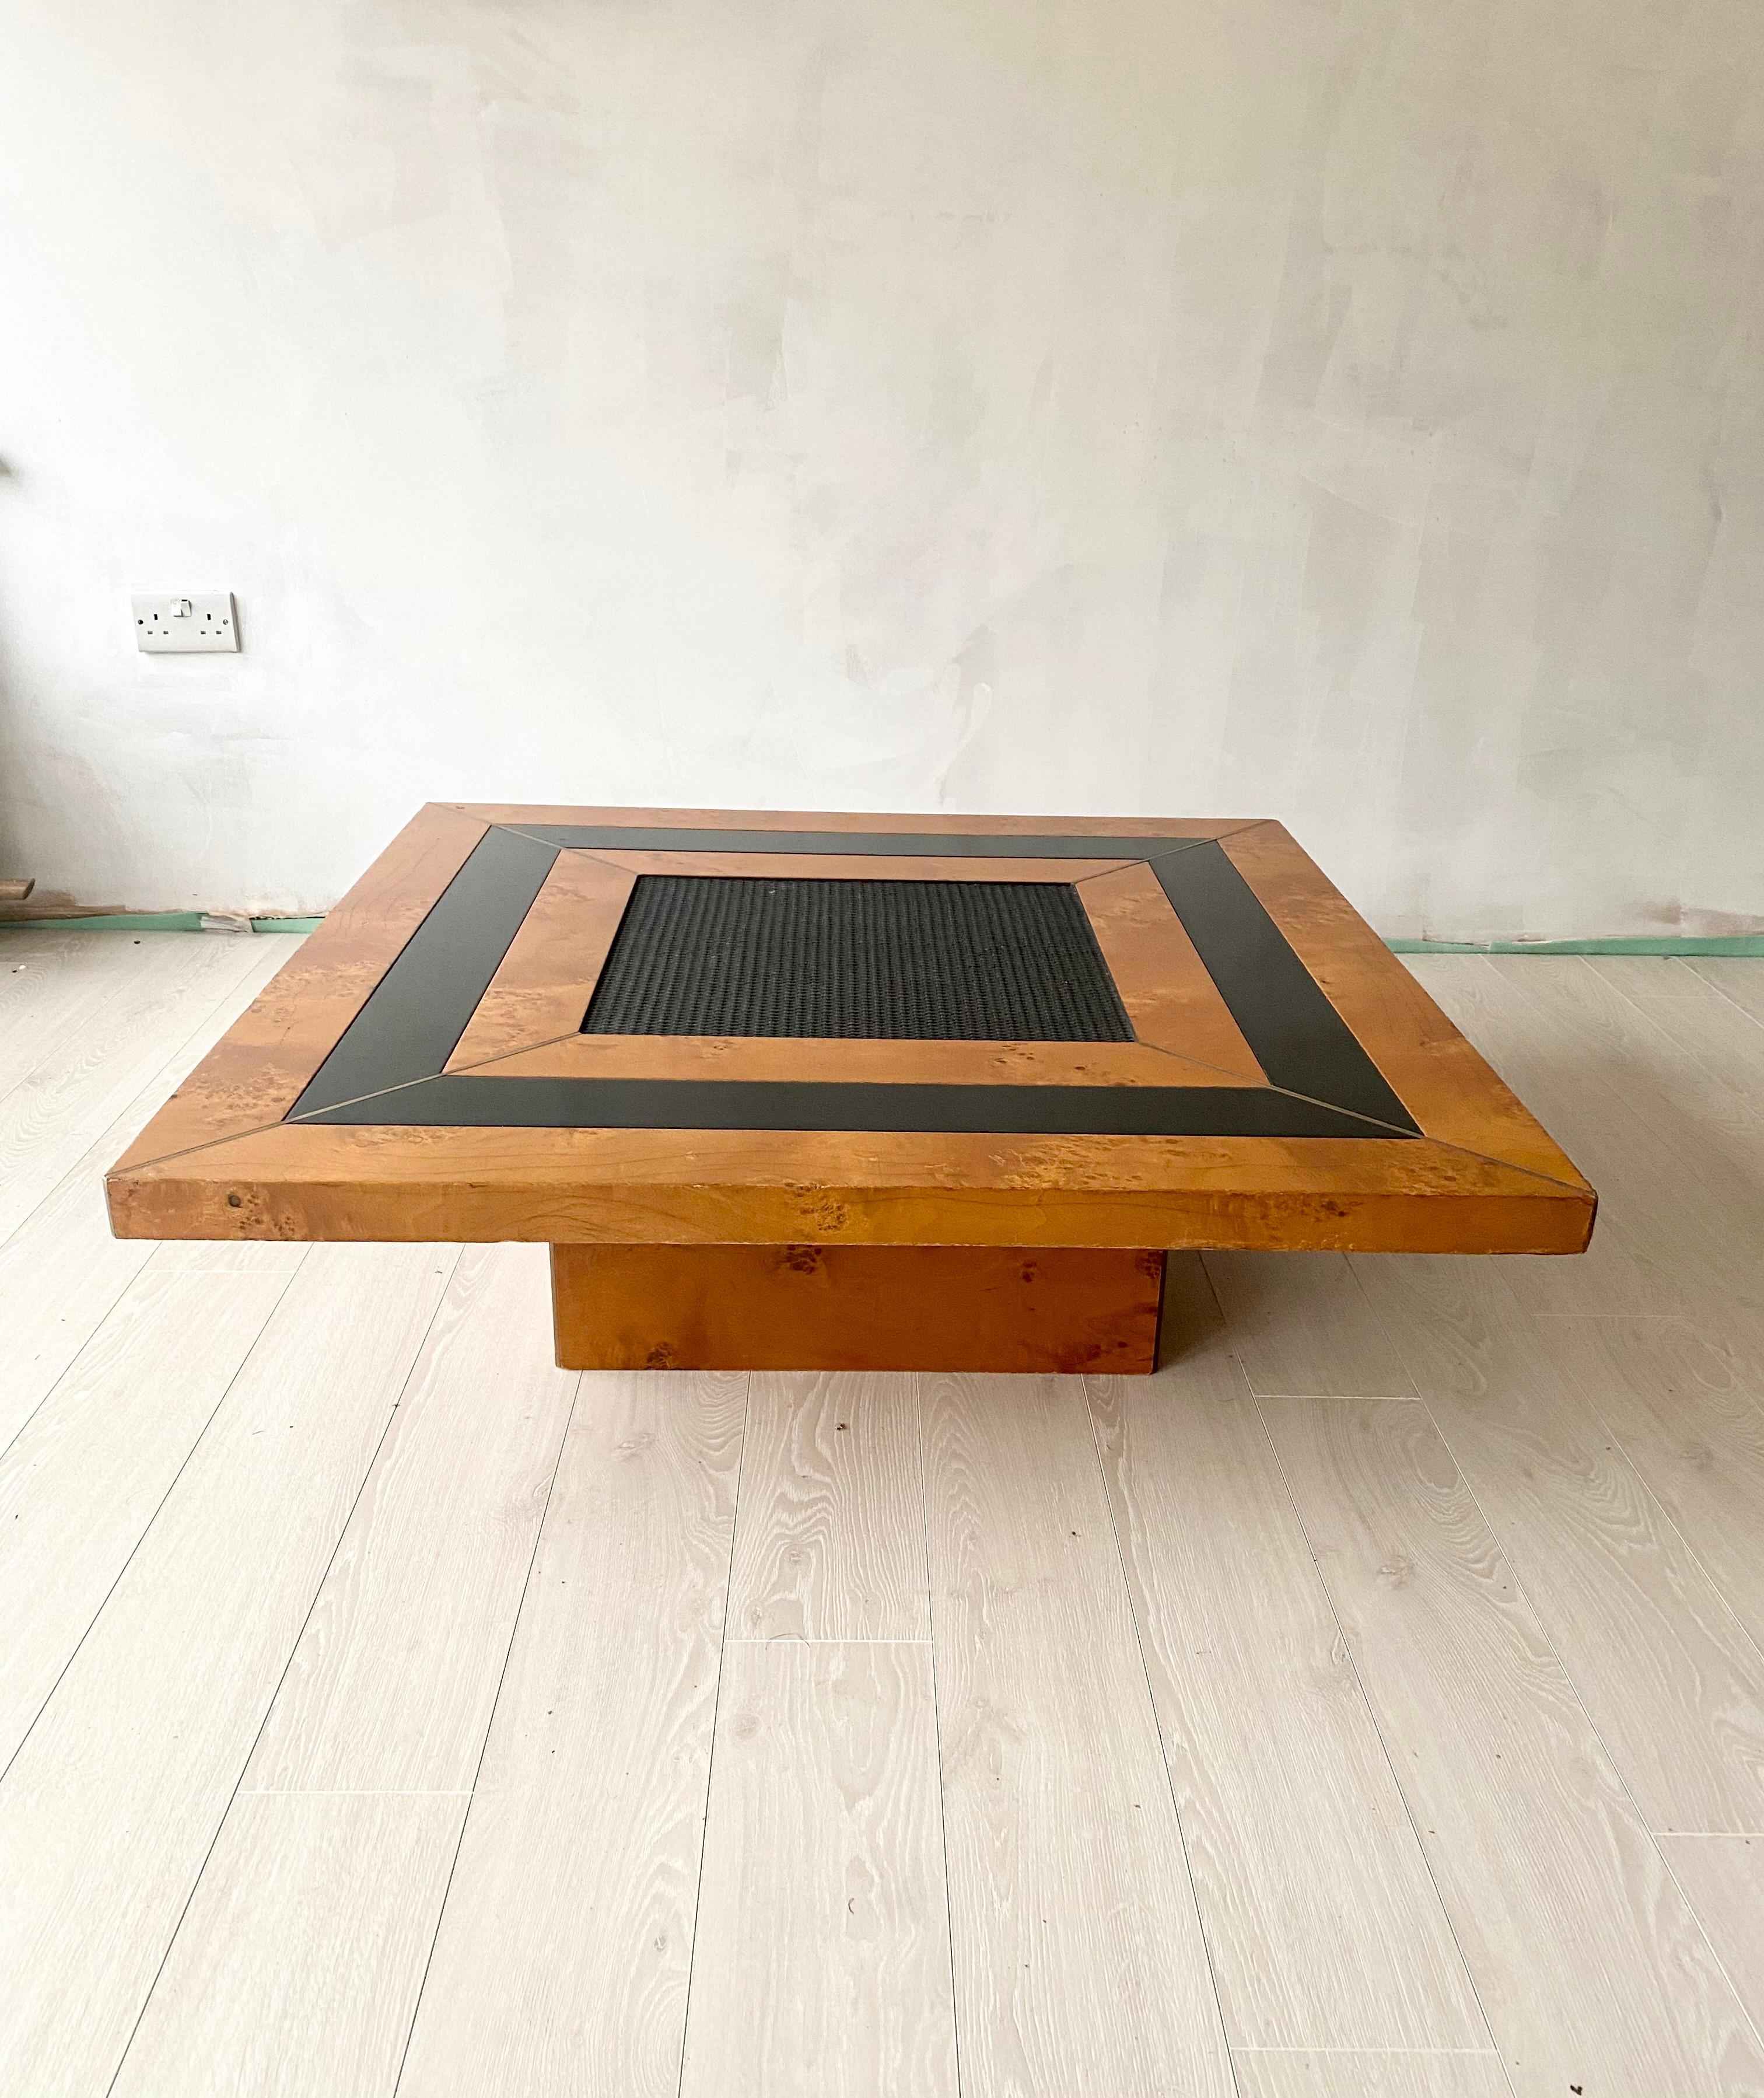 A beautiful vintage coffee table made of burl wood with a woven centre and brass inlay.
Sleek low design with a black lacquer strip wrapping all the way around the top between the burl. 
A brass trim runs from each corner to the centre. 
Quality